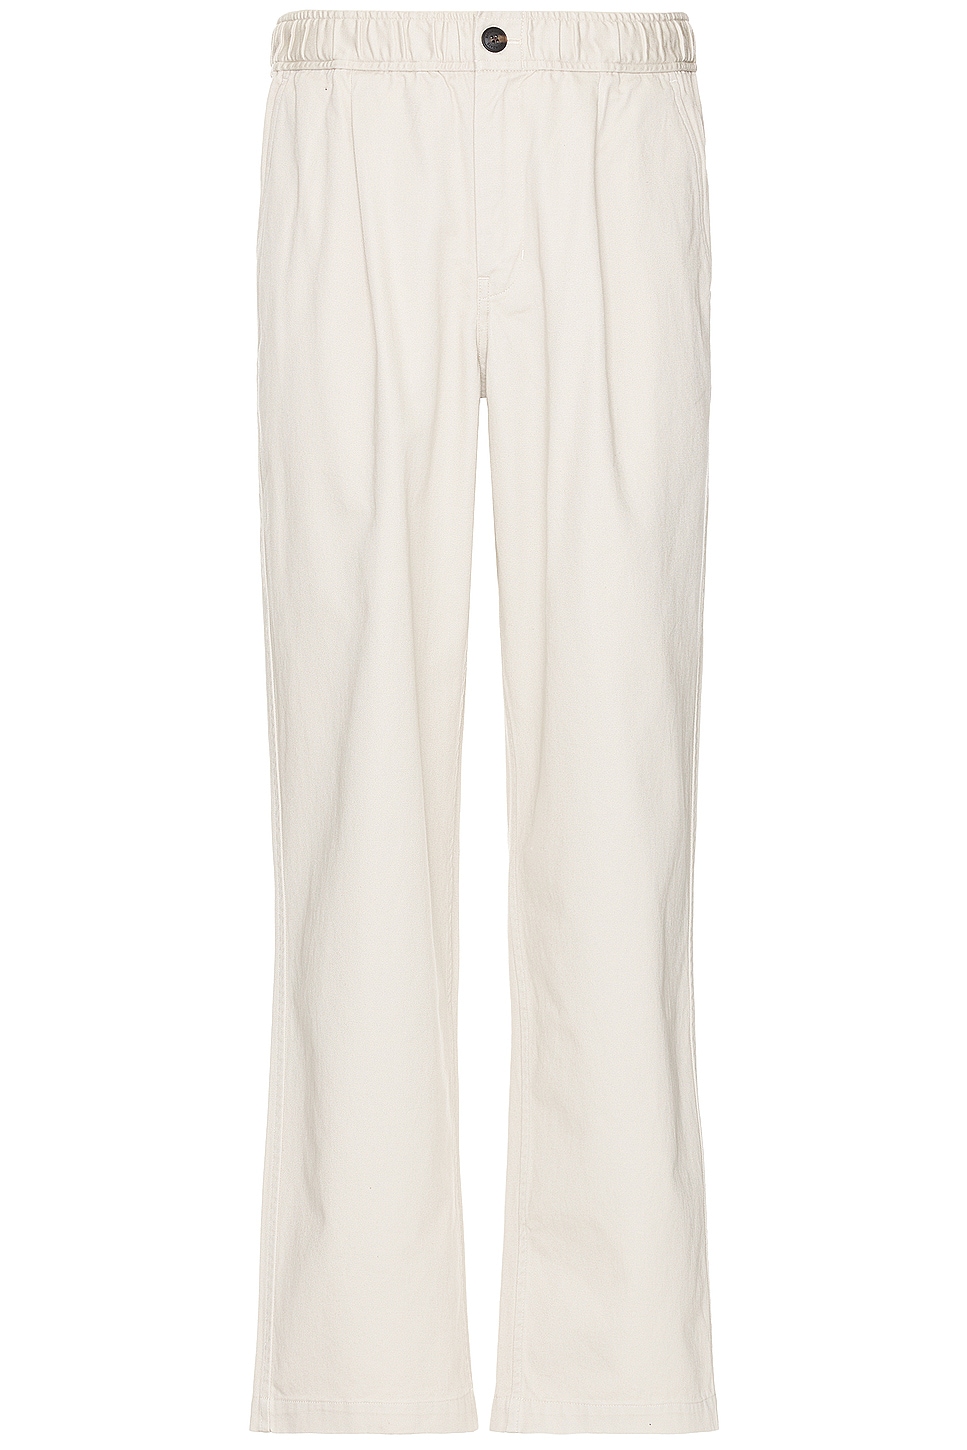 Image 1 of SATURDAYS NYC George Lightweight Cotton Trouser in Pumice Stone